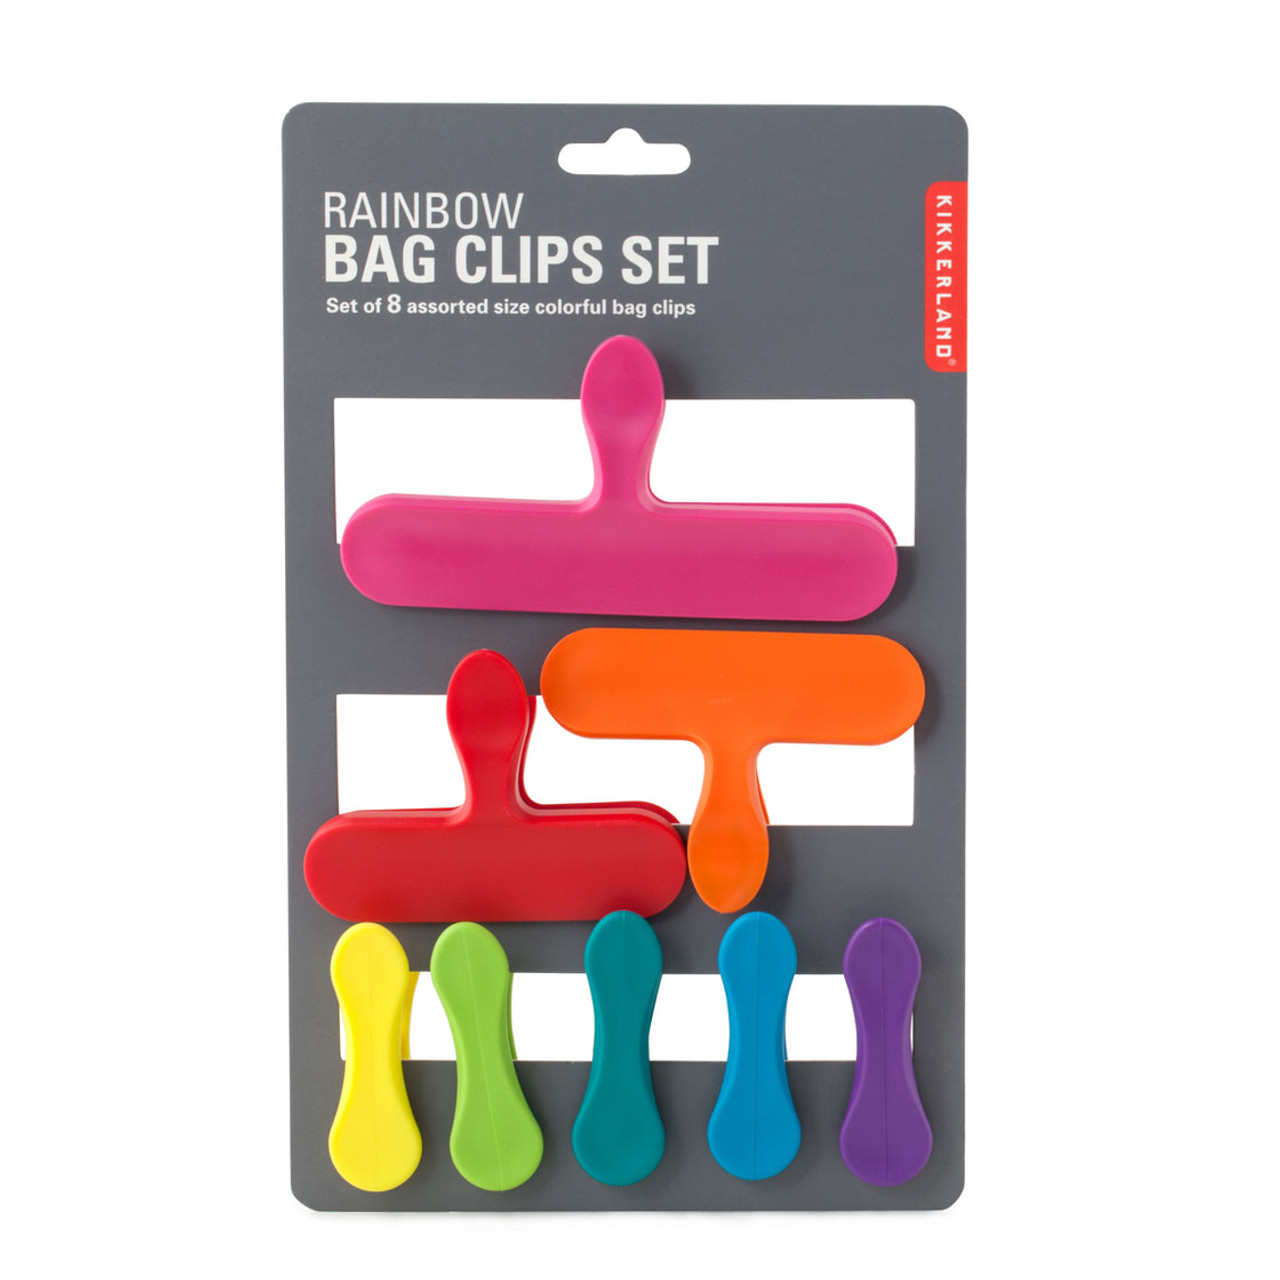 Bakelicious 73807 Decorating Bag Clips, Set of 3